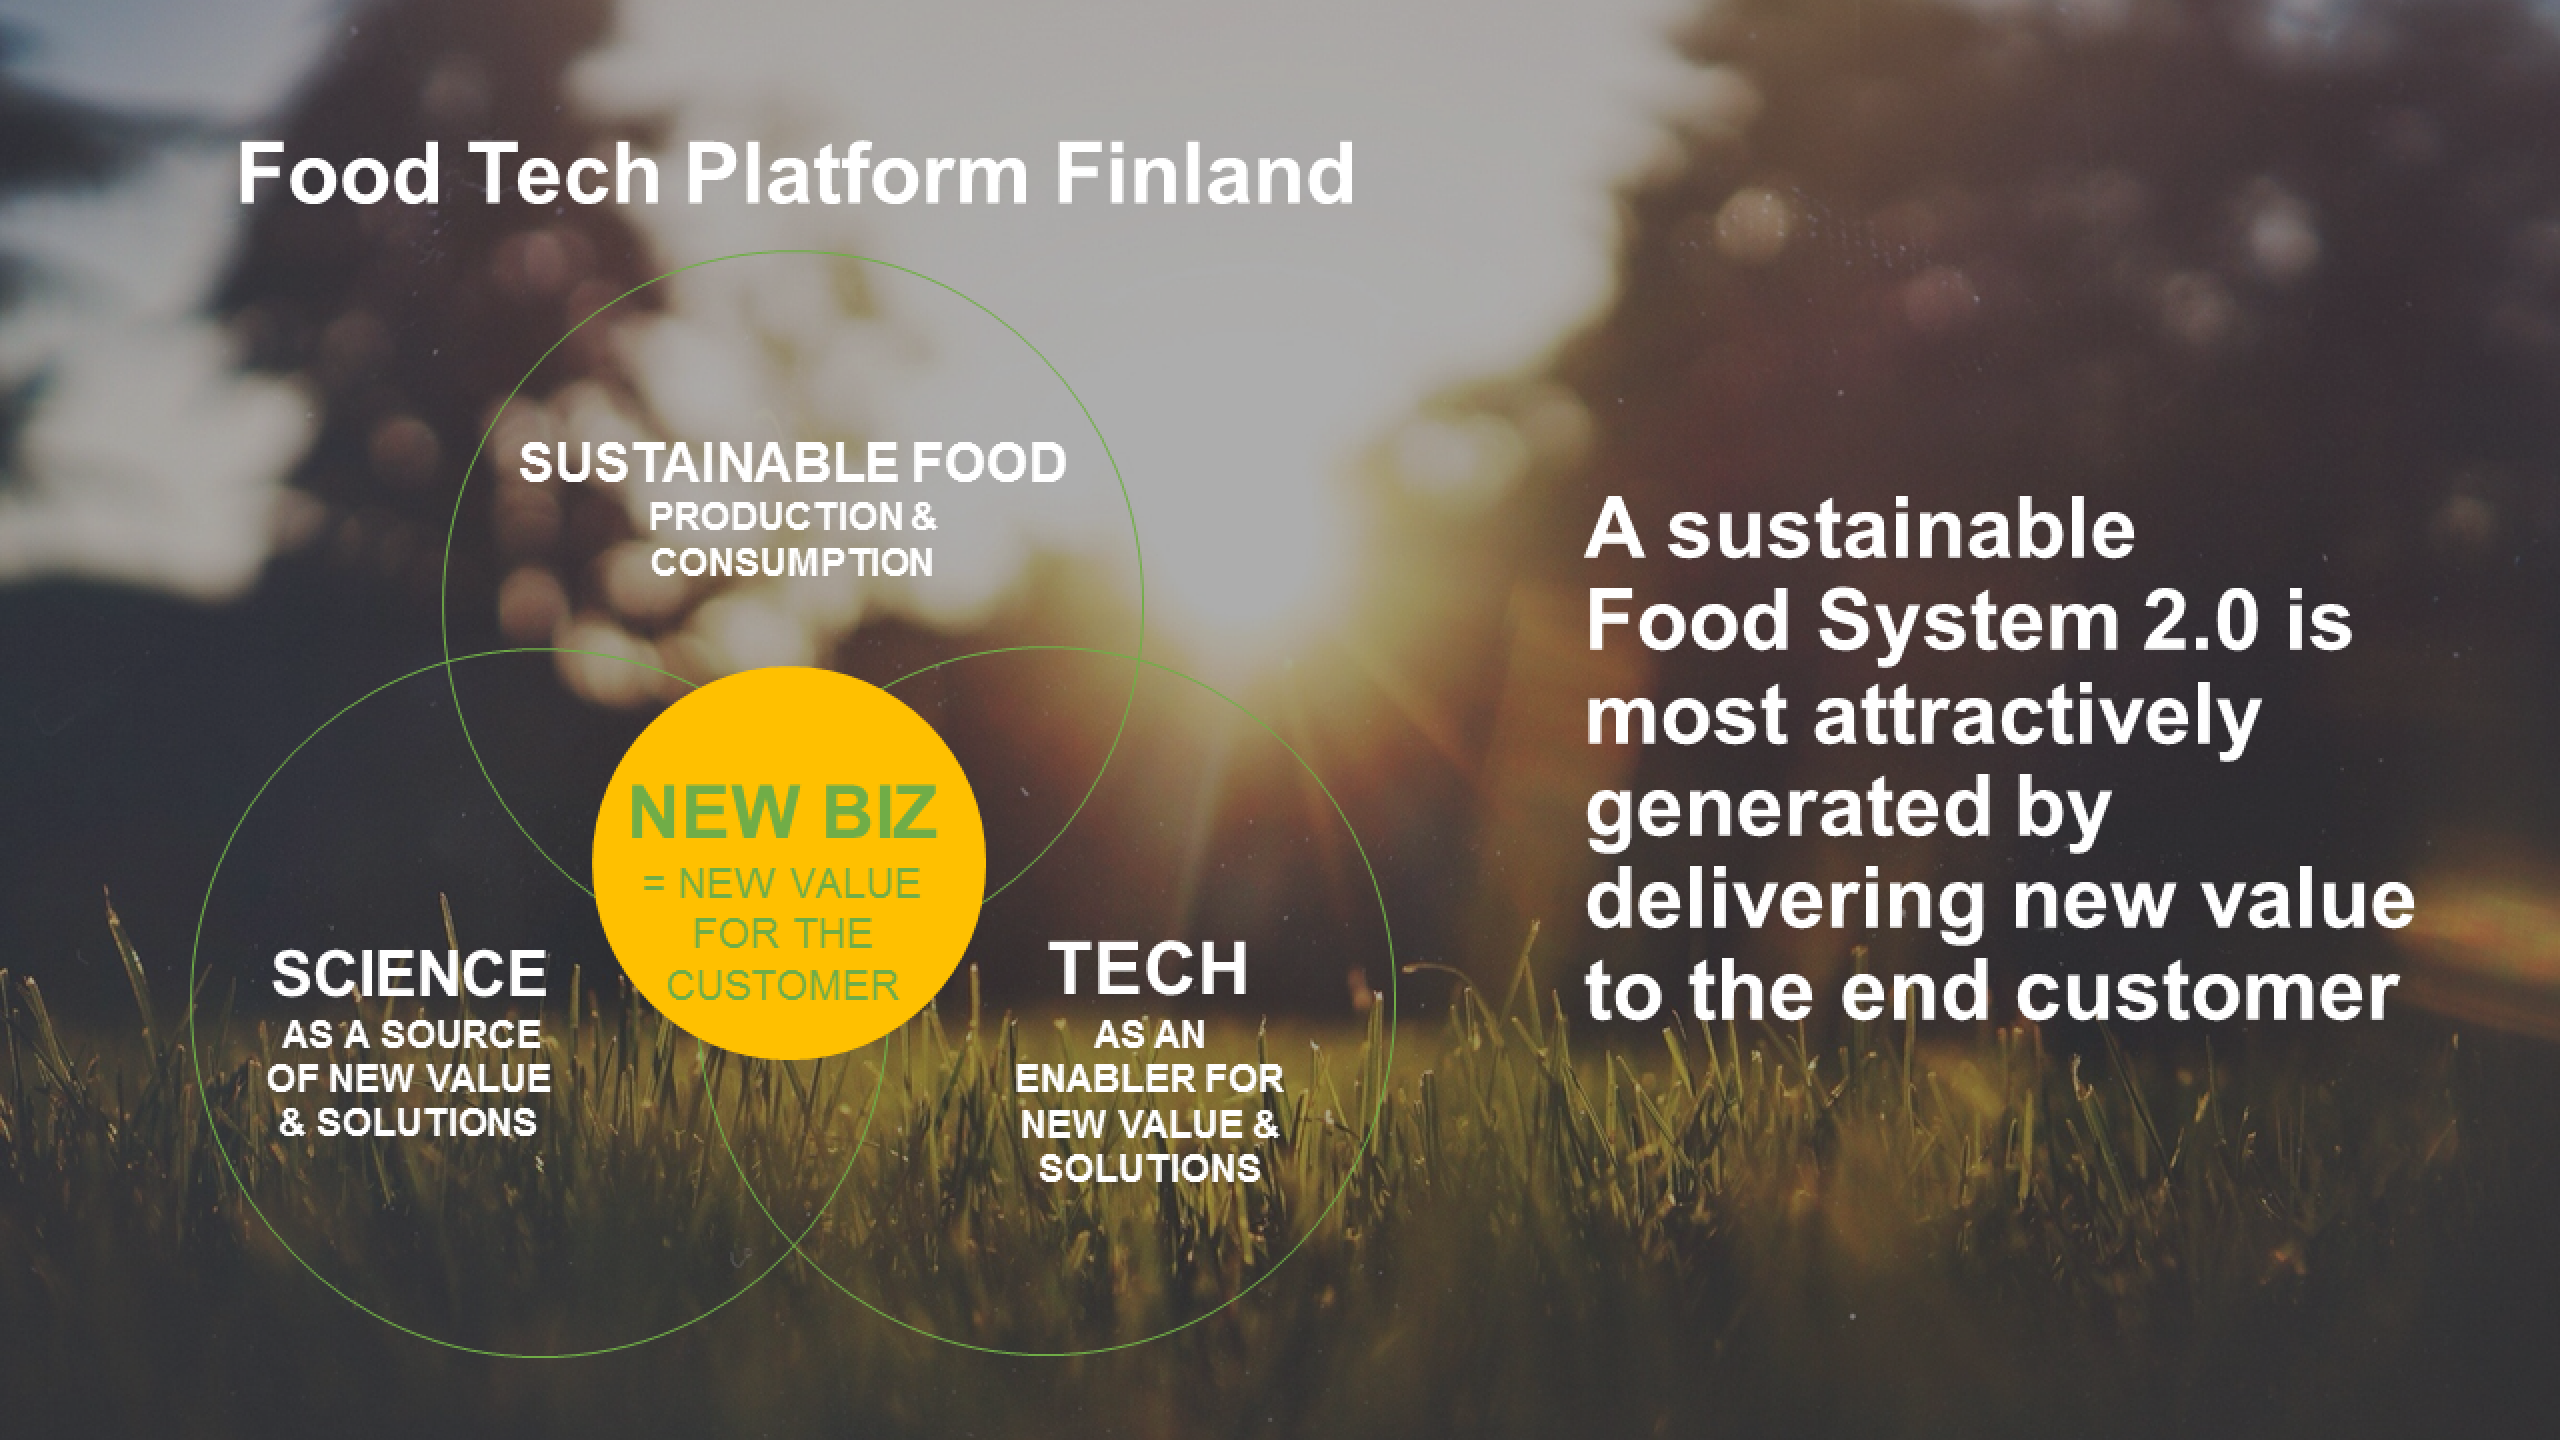 Image: On the background, grass glimmering on the light of sun setting or rising behind some trees. On the front, graphic objects and text. On the left half of the image, under the title Food Tech Platform Finland, three circles with text in them, one on the top and two on the bottom. In the circle on the top, SUSTAINABLE FOOD, production & consumption. In the left cirle of the bottom row, SCIENCE as a source of new value & solutions. In the right cirle of the bottom row, TECH as an enabler for new value & solutions. These three circles are partially on top of each other, forming an union in their middle and there is a fourth circle in the middle of the formation. The middle circle has the text NEW BIZ = new value for the customer. On the right half of the image, A sustainable Food System 2.0 is most attractively generated by delivering new value to the end customer.